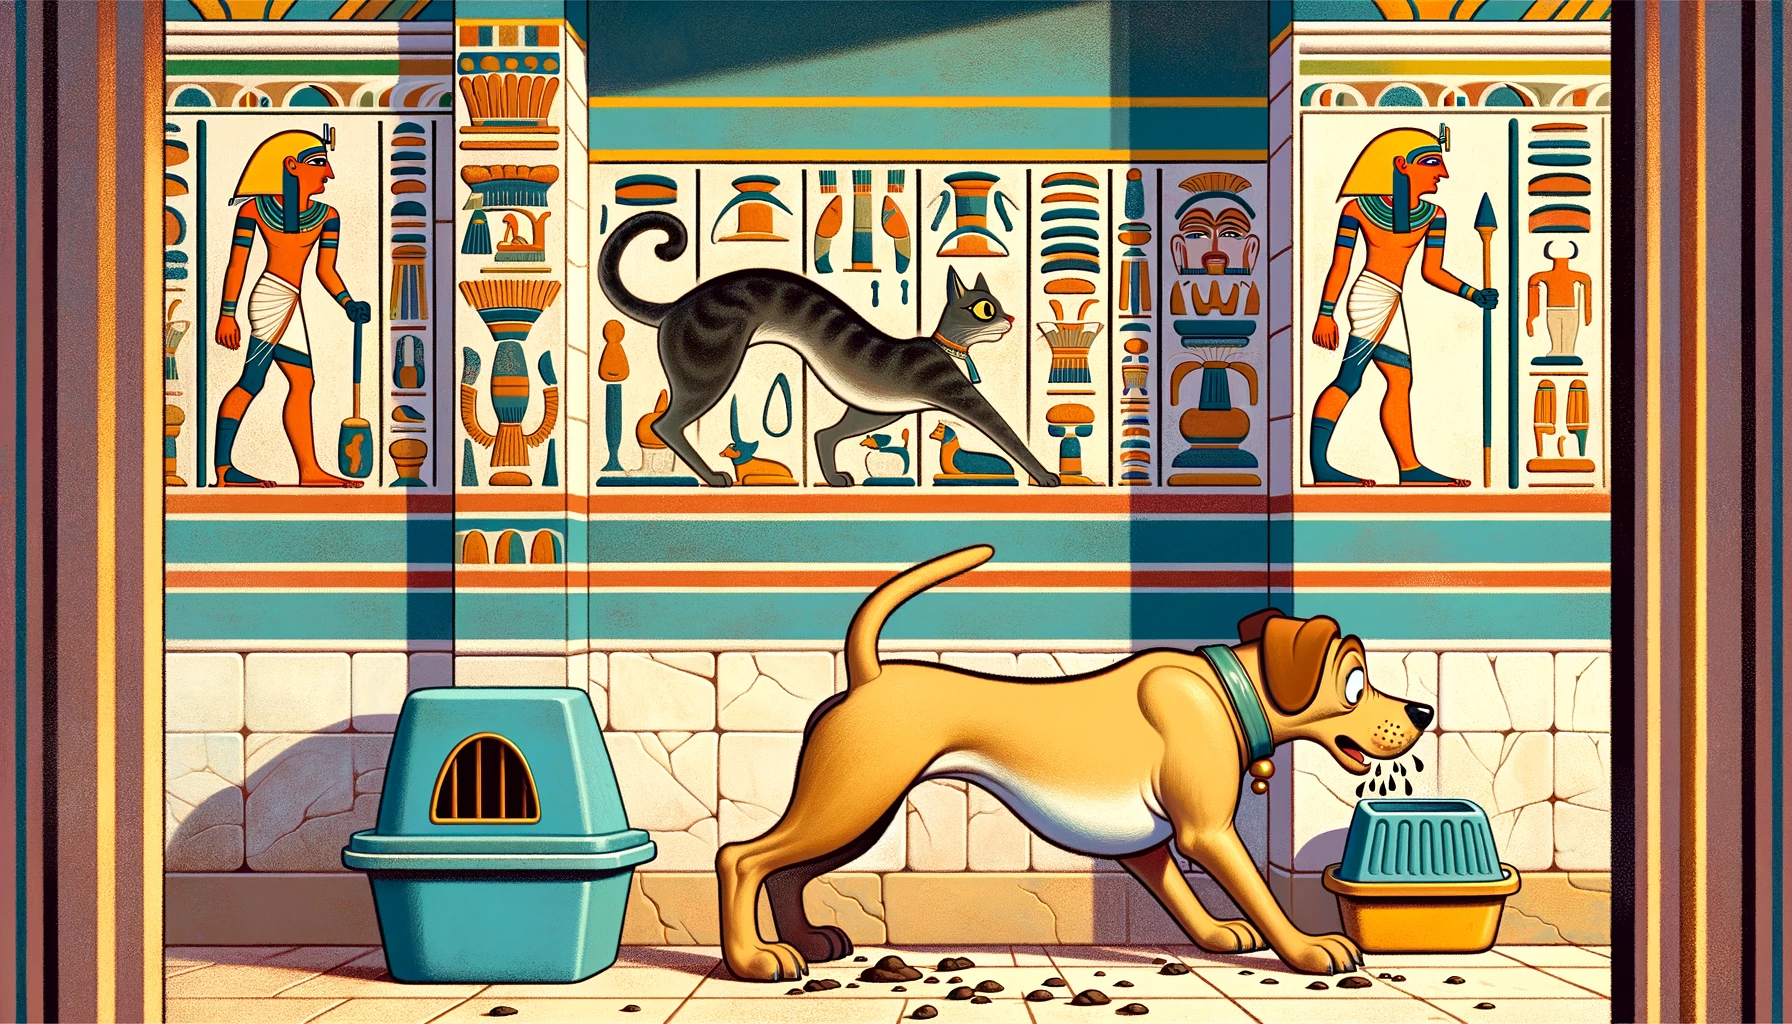 Cartoon dog sneakily eating from a cat's litter box in Egyptian Ptolemaic style.